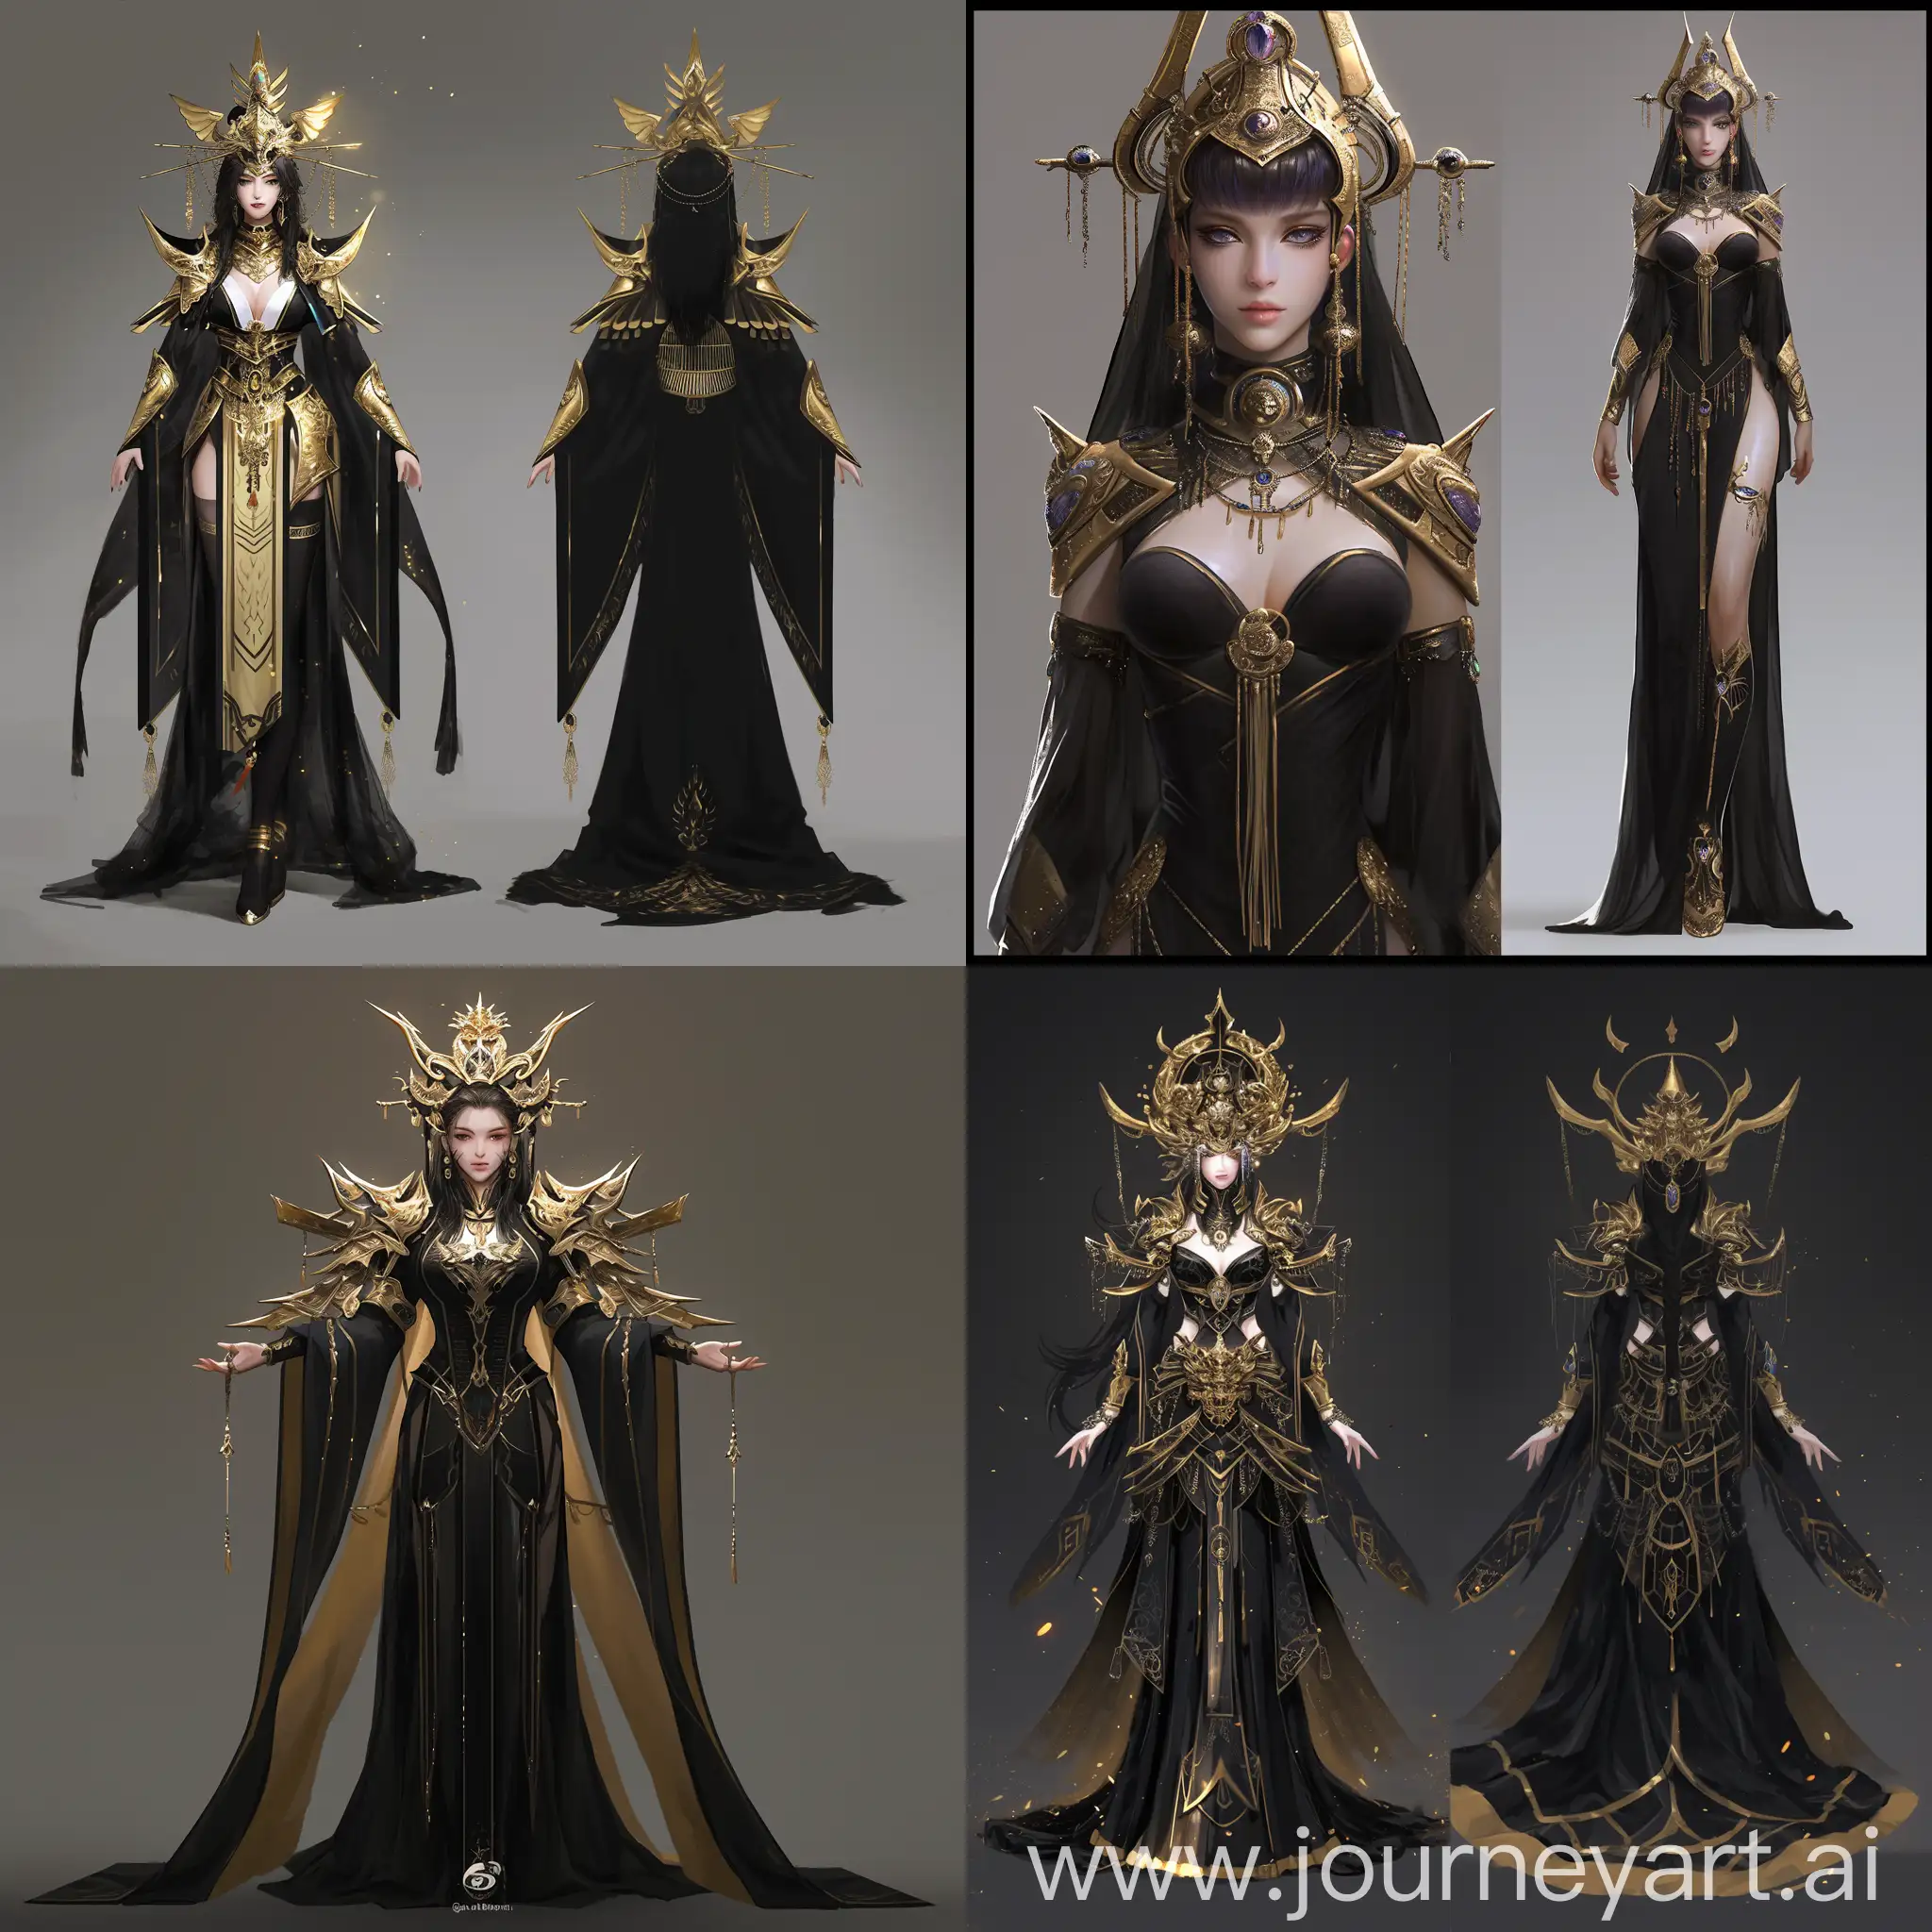 Chinese style cultivating immortals, 4K CG realistic style, Full body concept art of the Egyptian goddess Knight in black and gold, character design for a game, with a golden headdress and jewelry on her arms --niji 6